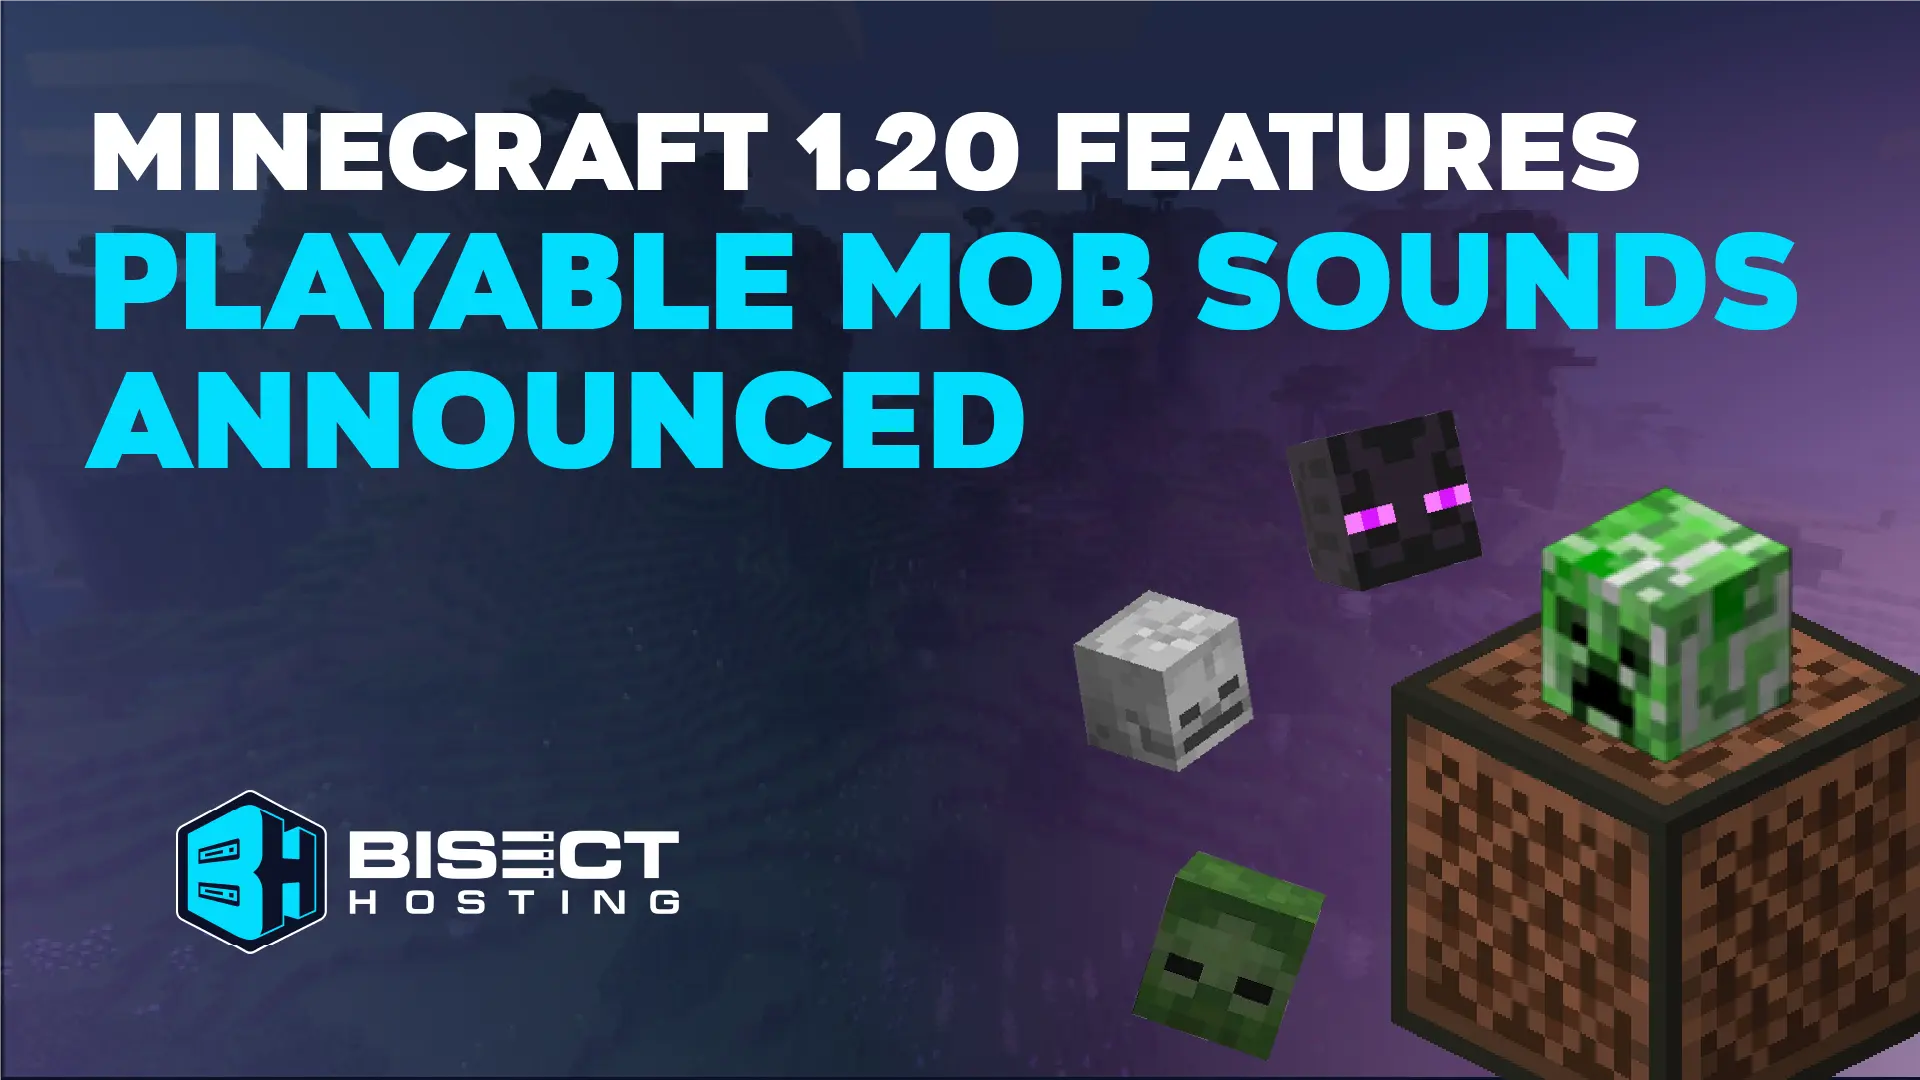 Minecraft 1.20 Features: Playable Mob Sounds Announced